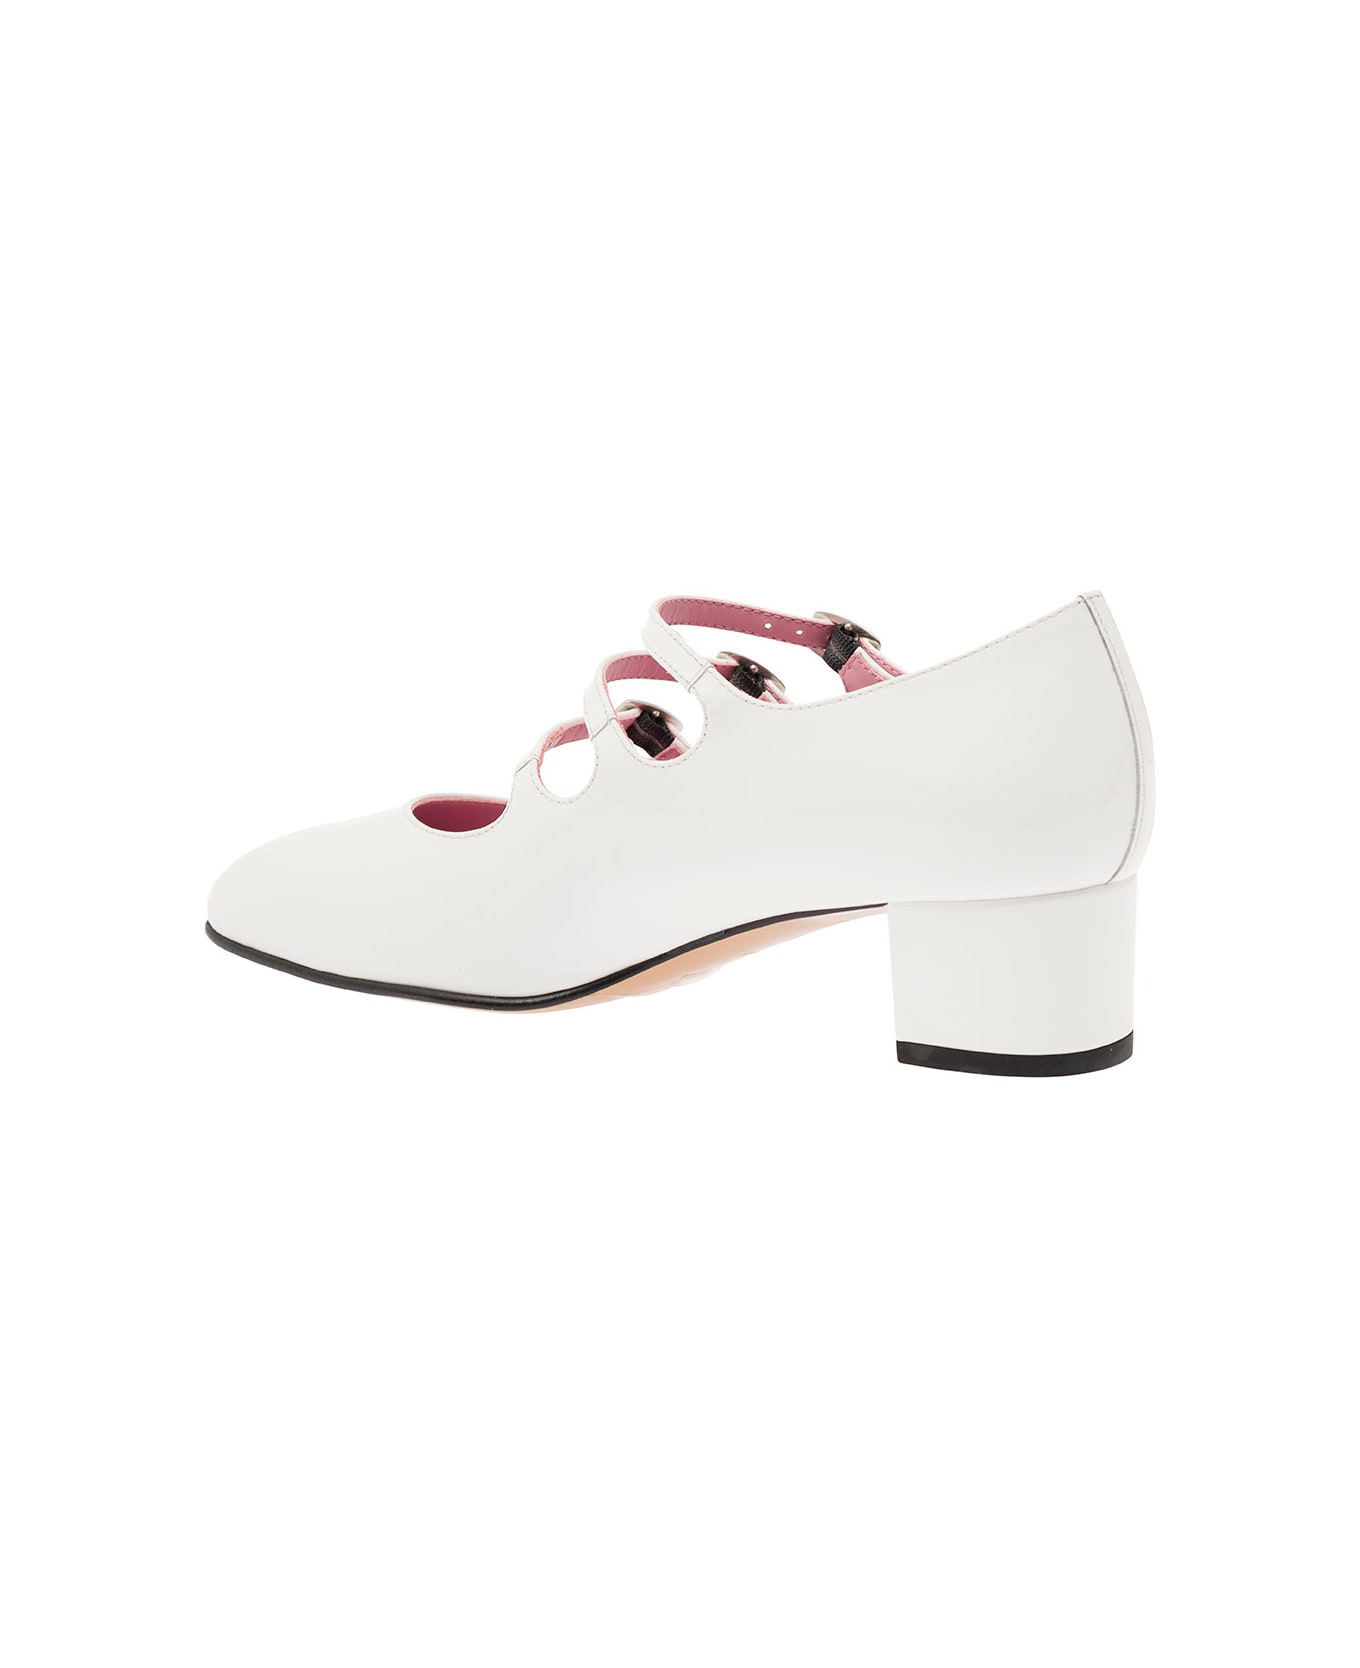 Carel 'kina' White Mary Janes With Straps And Block Heel In Patent Leather Woman - White ハイヒール